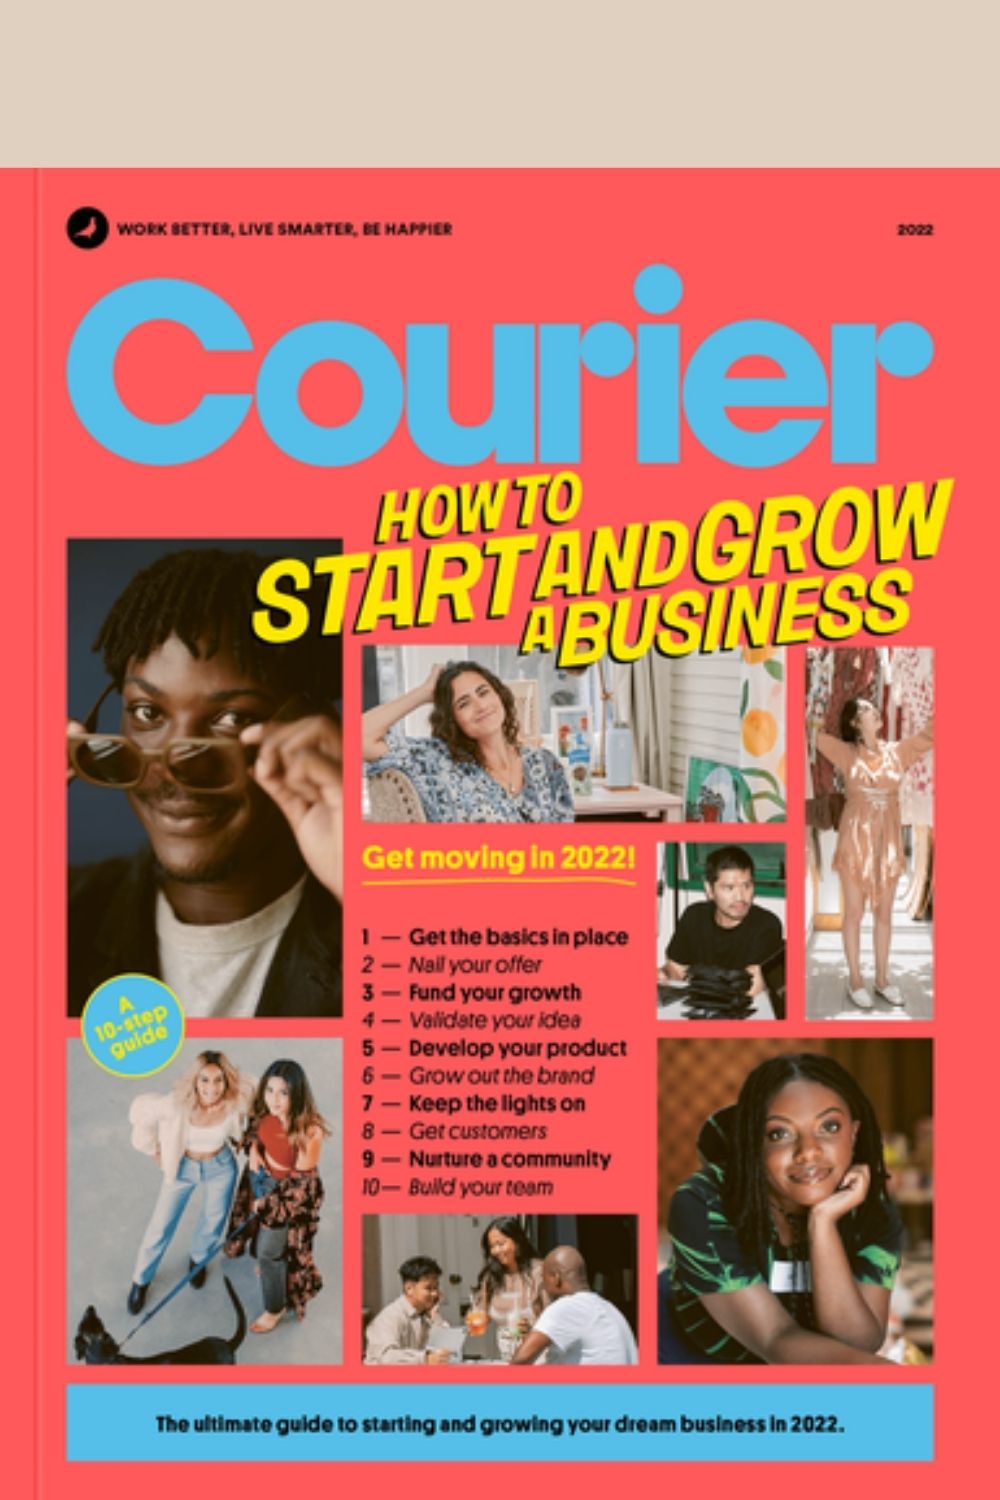 Courier: How to Start and Grow a Business 2022